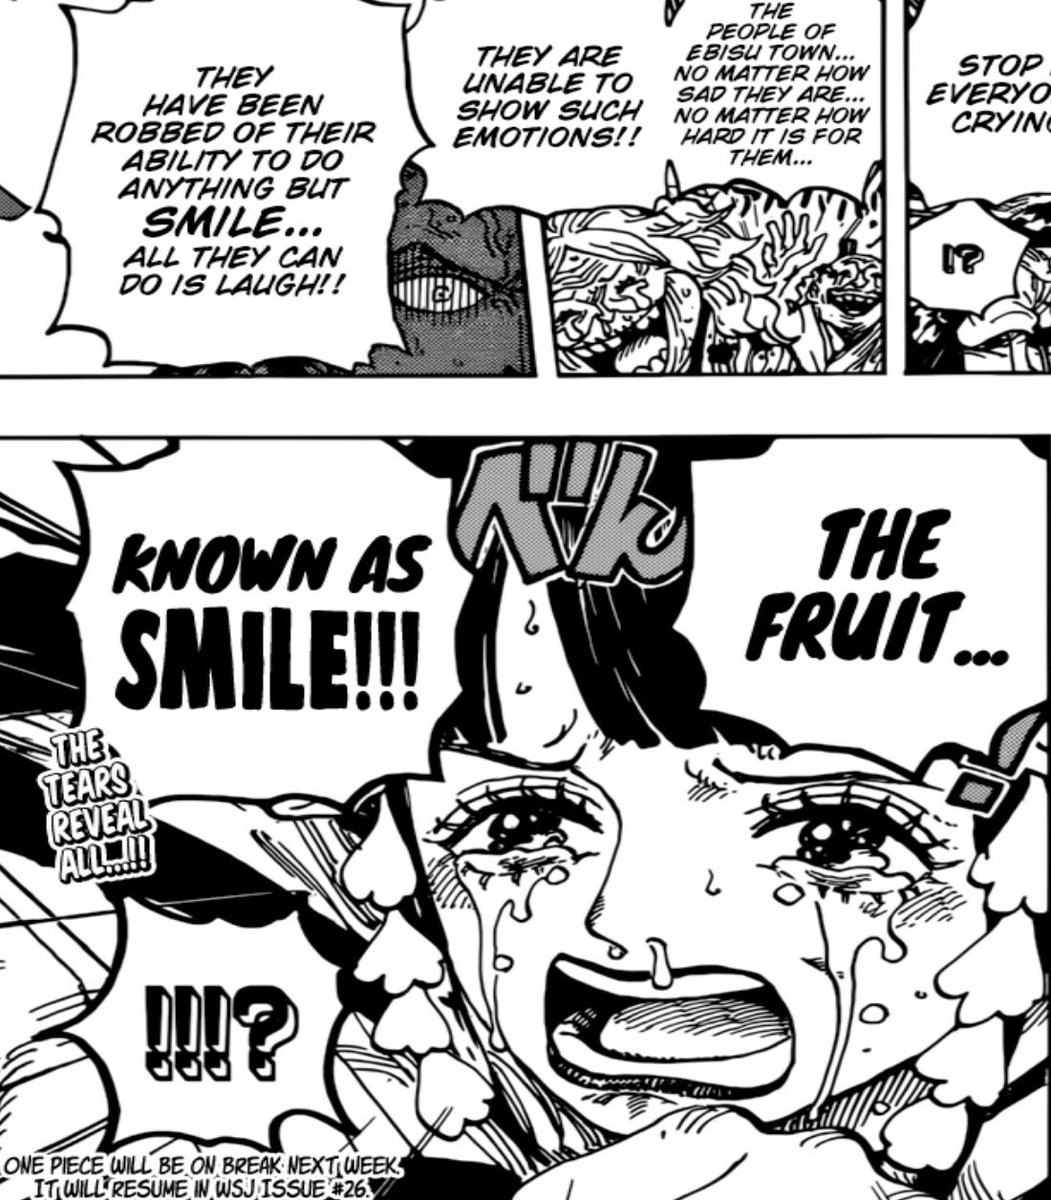 Kumi Pretty Good Chapter I Like Chapters That Make Me Dig Deep Into The Lore Of One Piece 942 Was One Of These Chapters